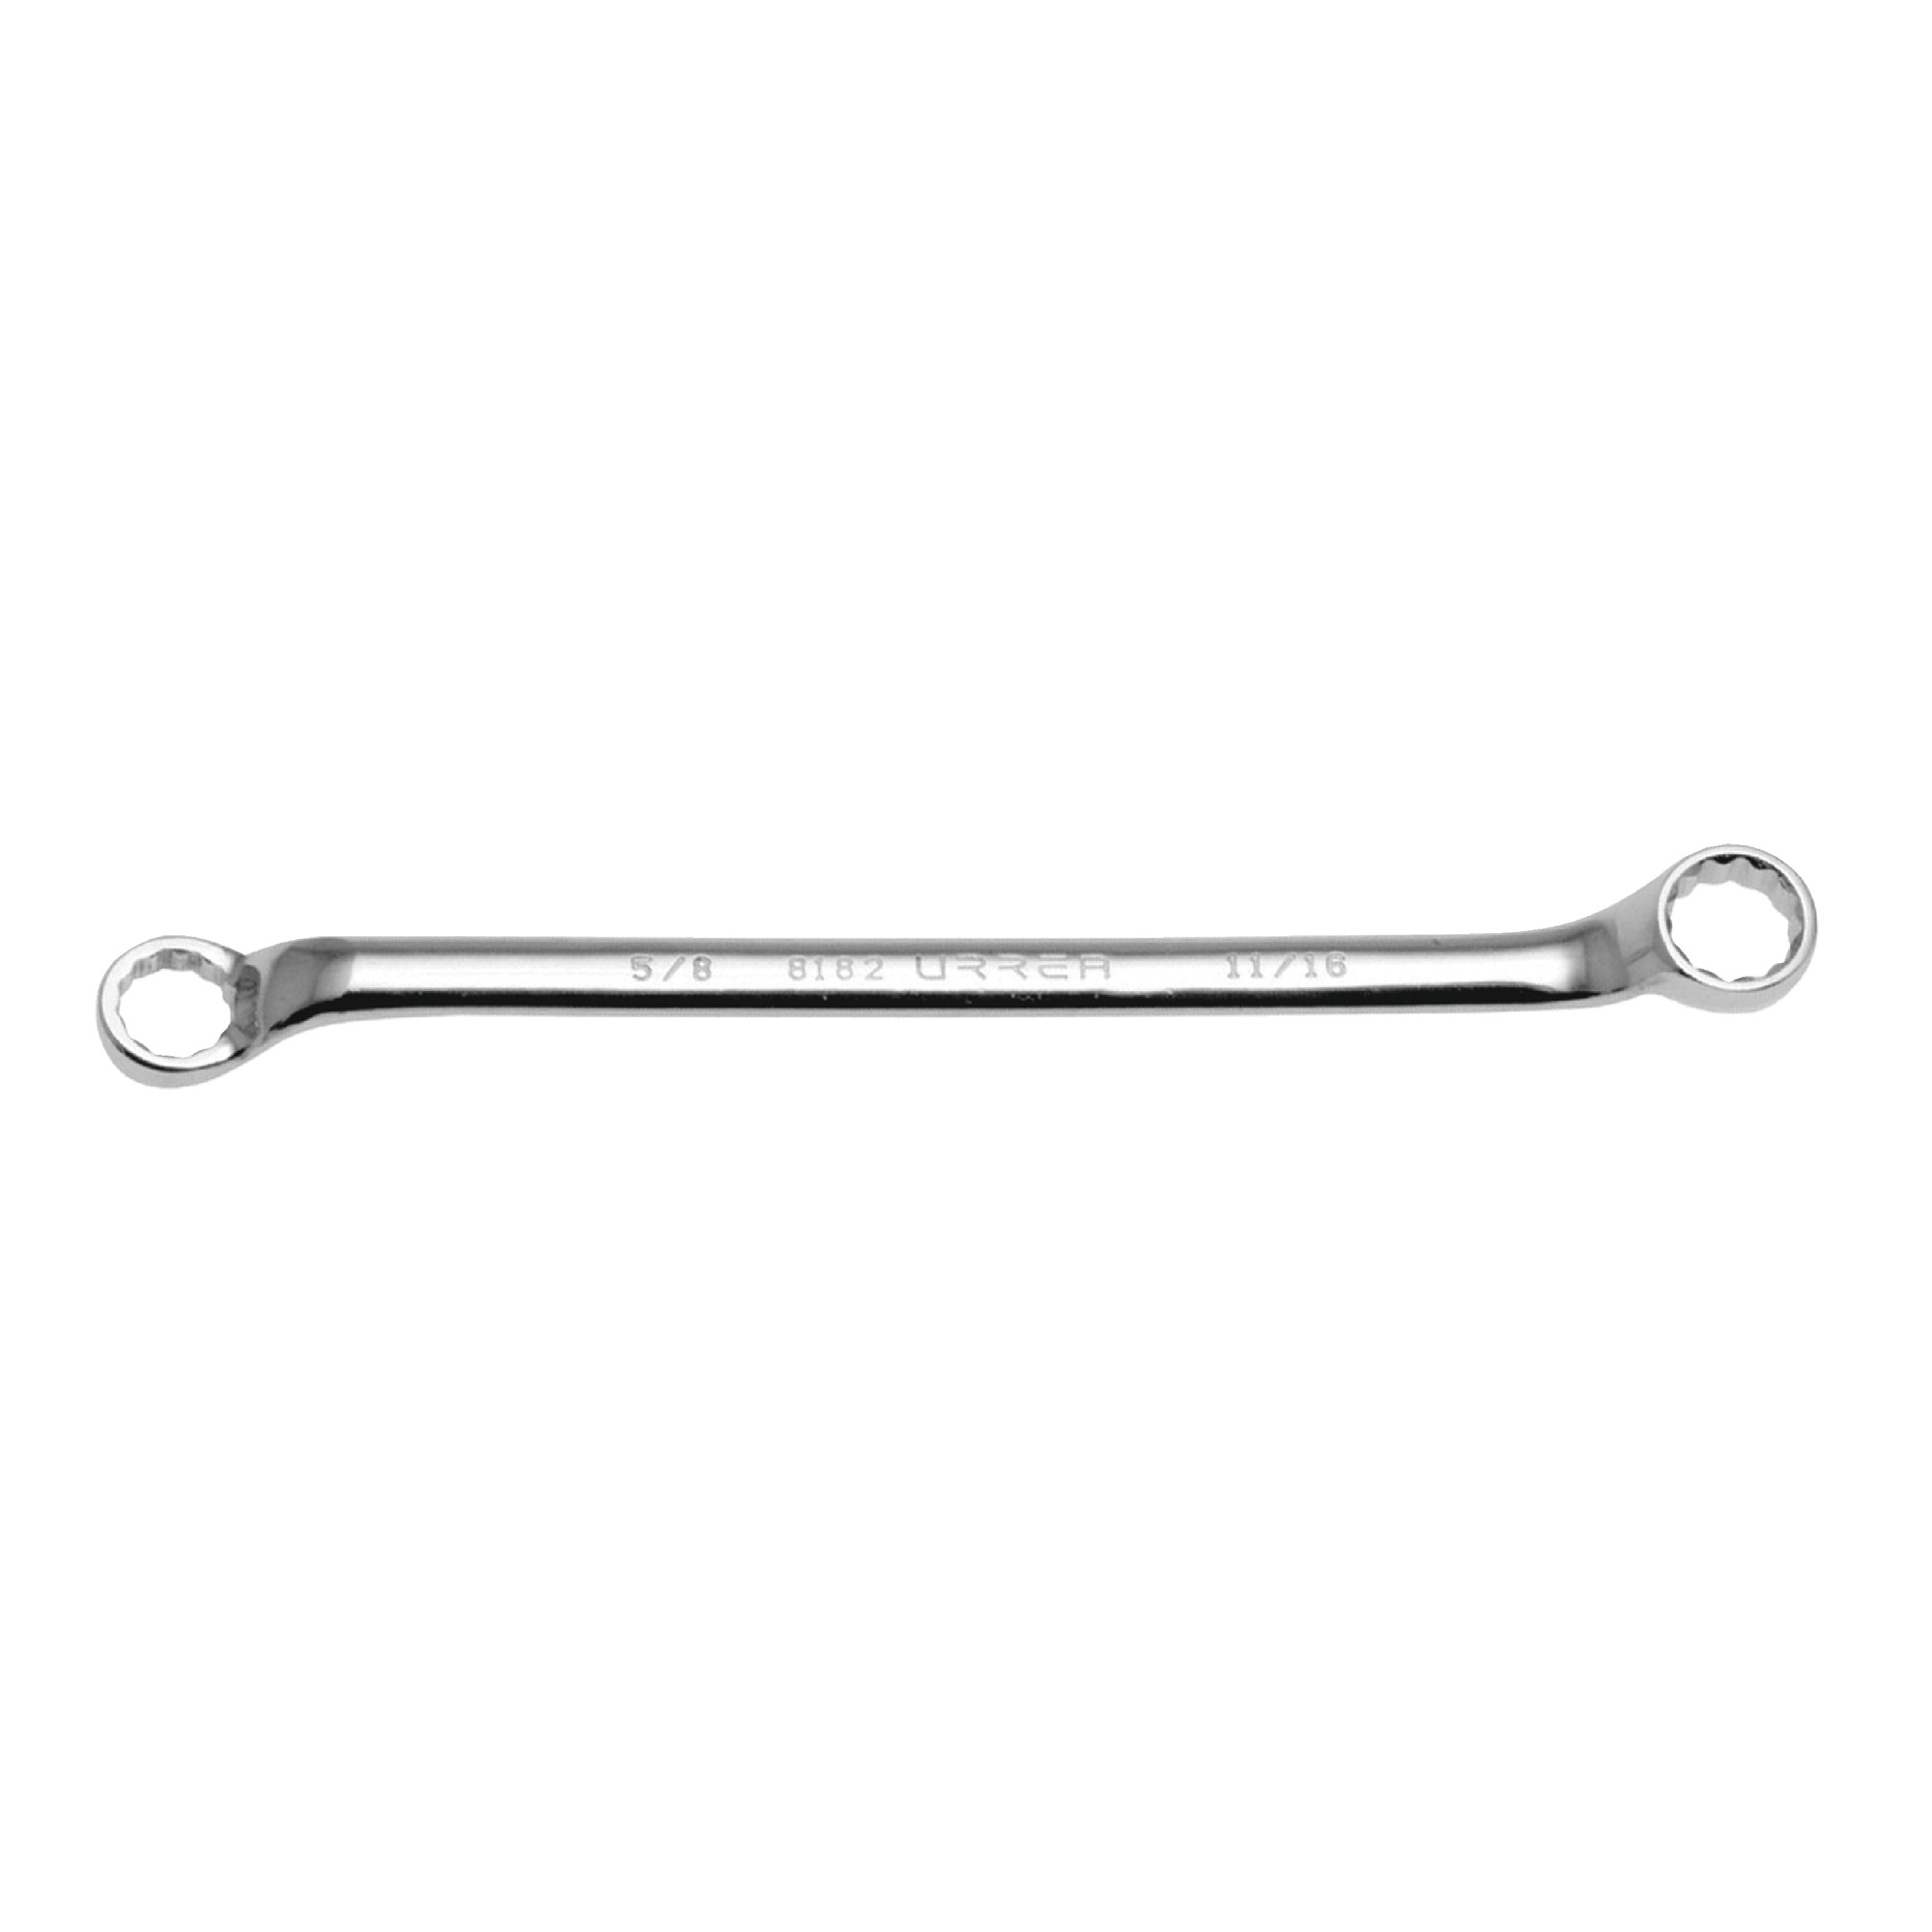 81922 19mm x 22mm Chrome Finish 12 Point Box Wrench